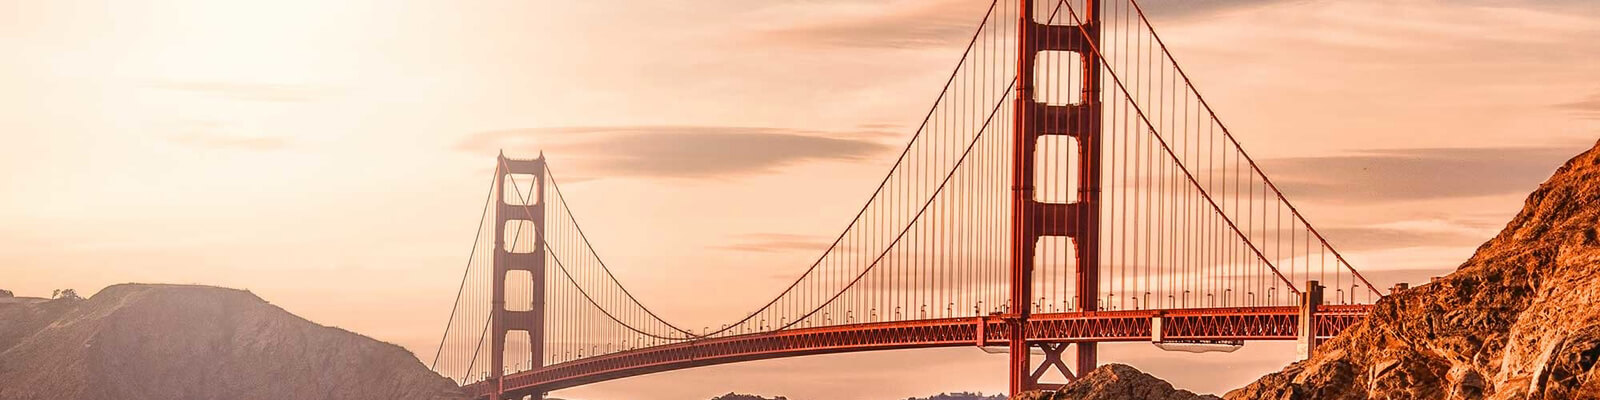 Go San Francisco Multi Attraction Card Coupons